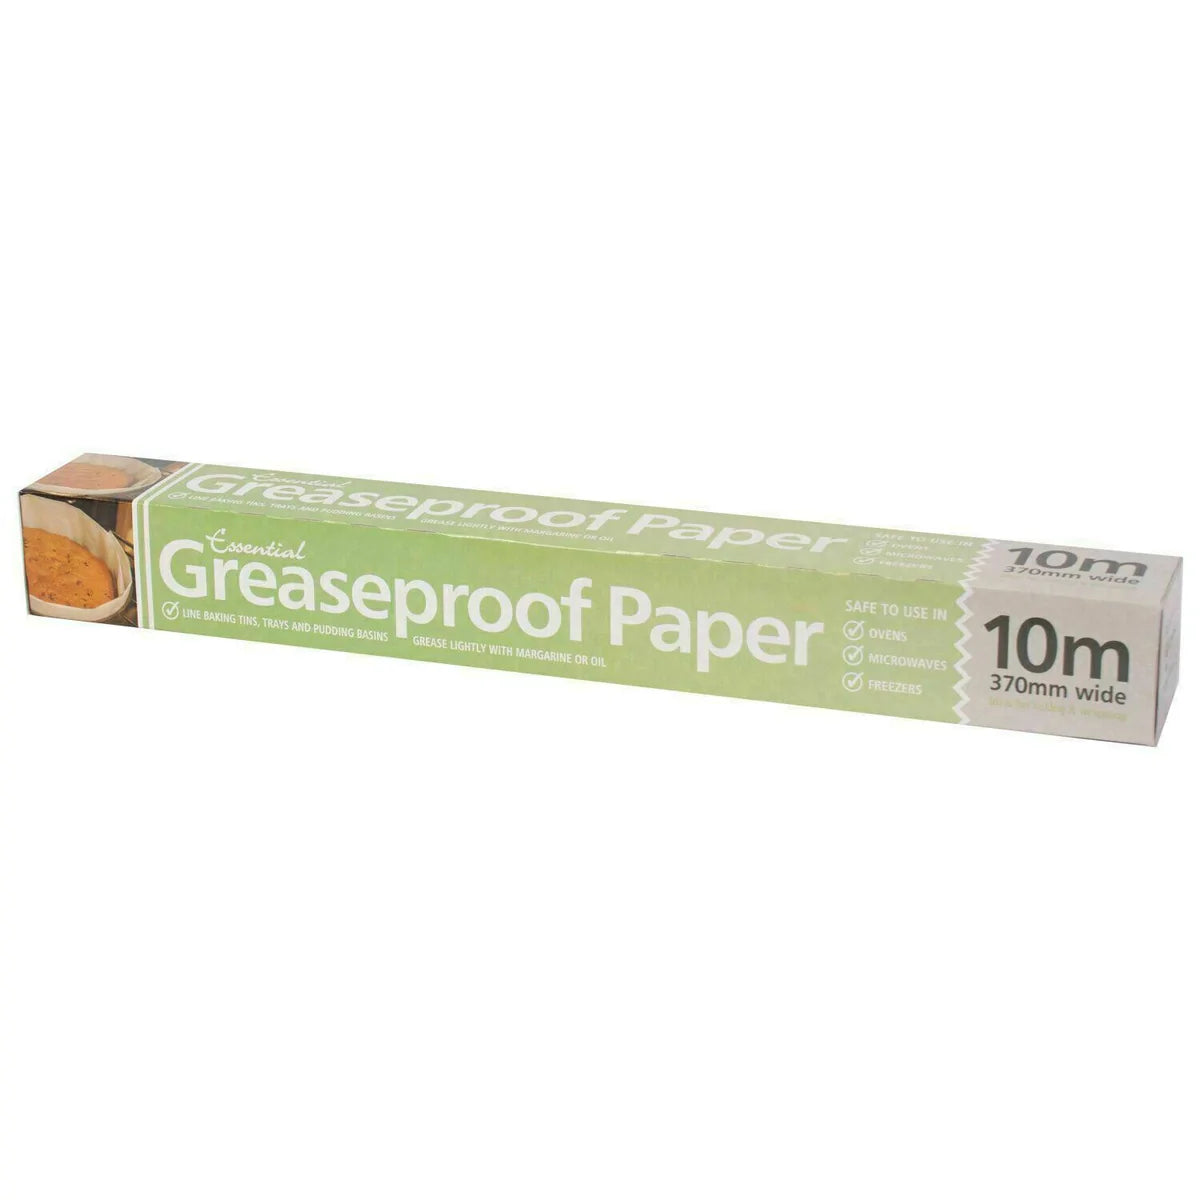 Essentials Greaseproof Paper Roll